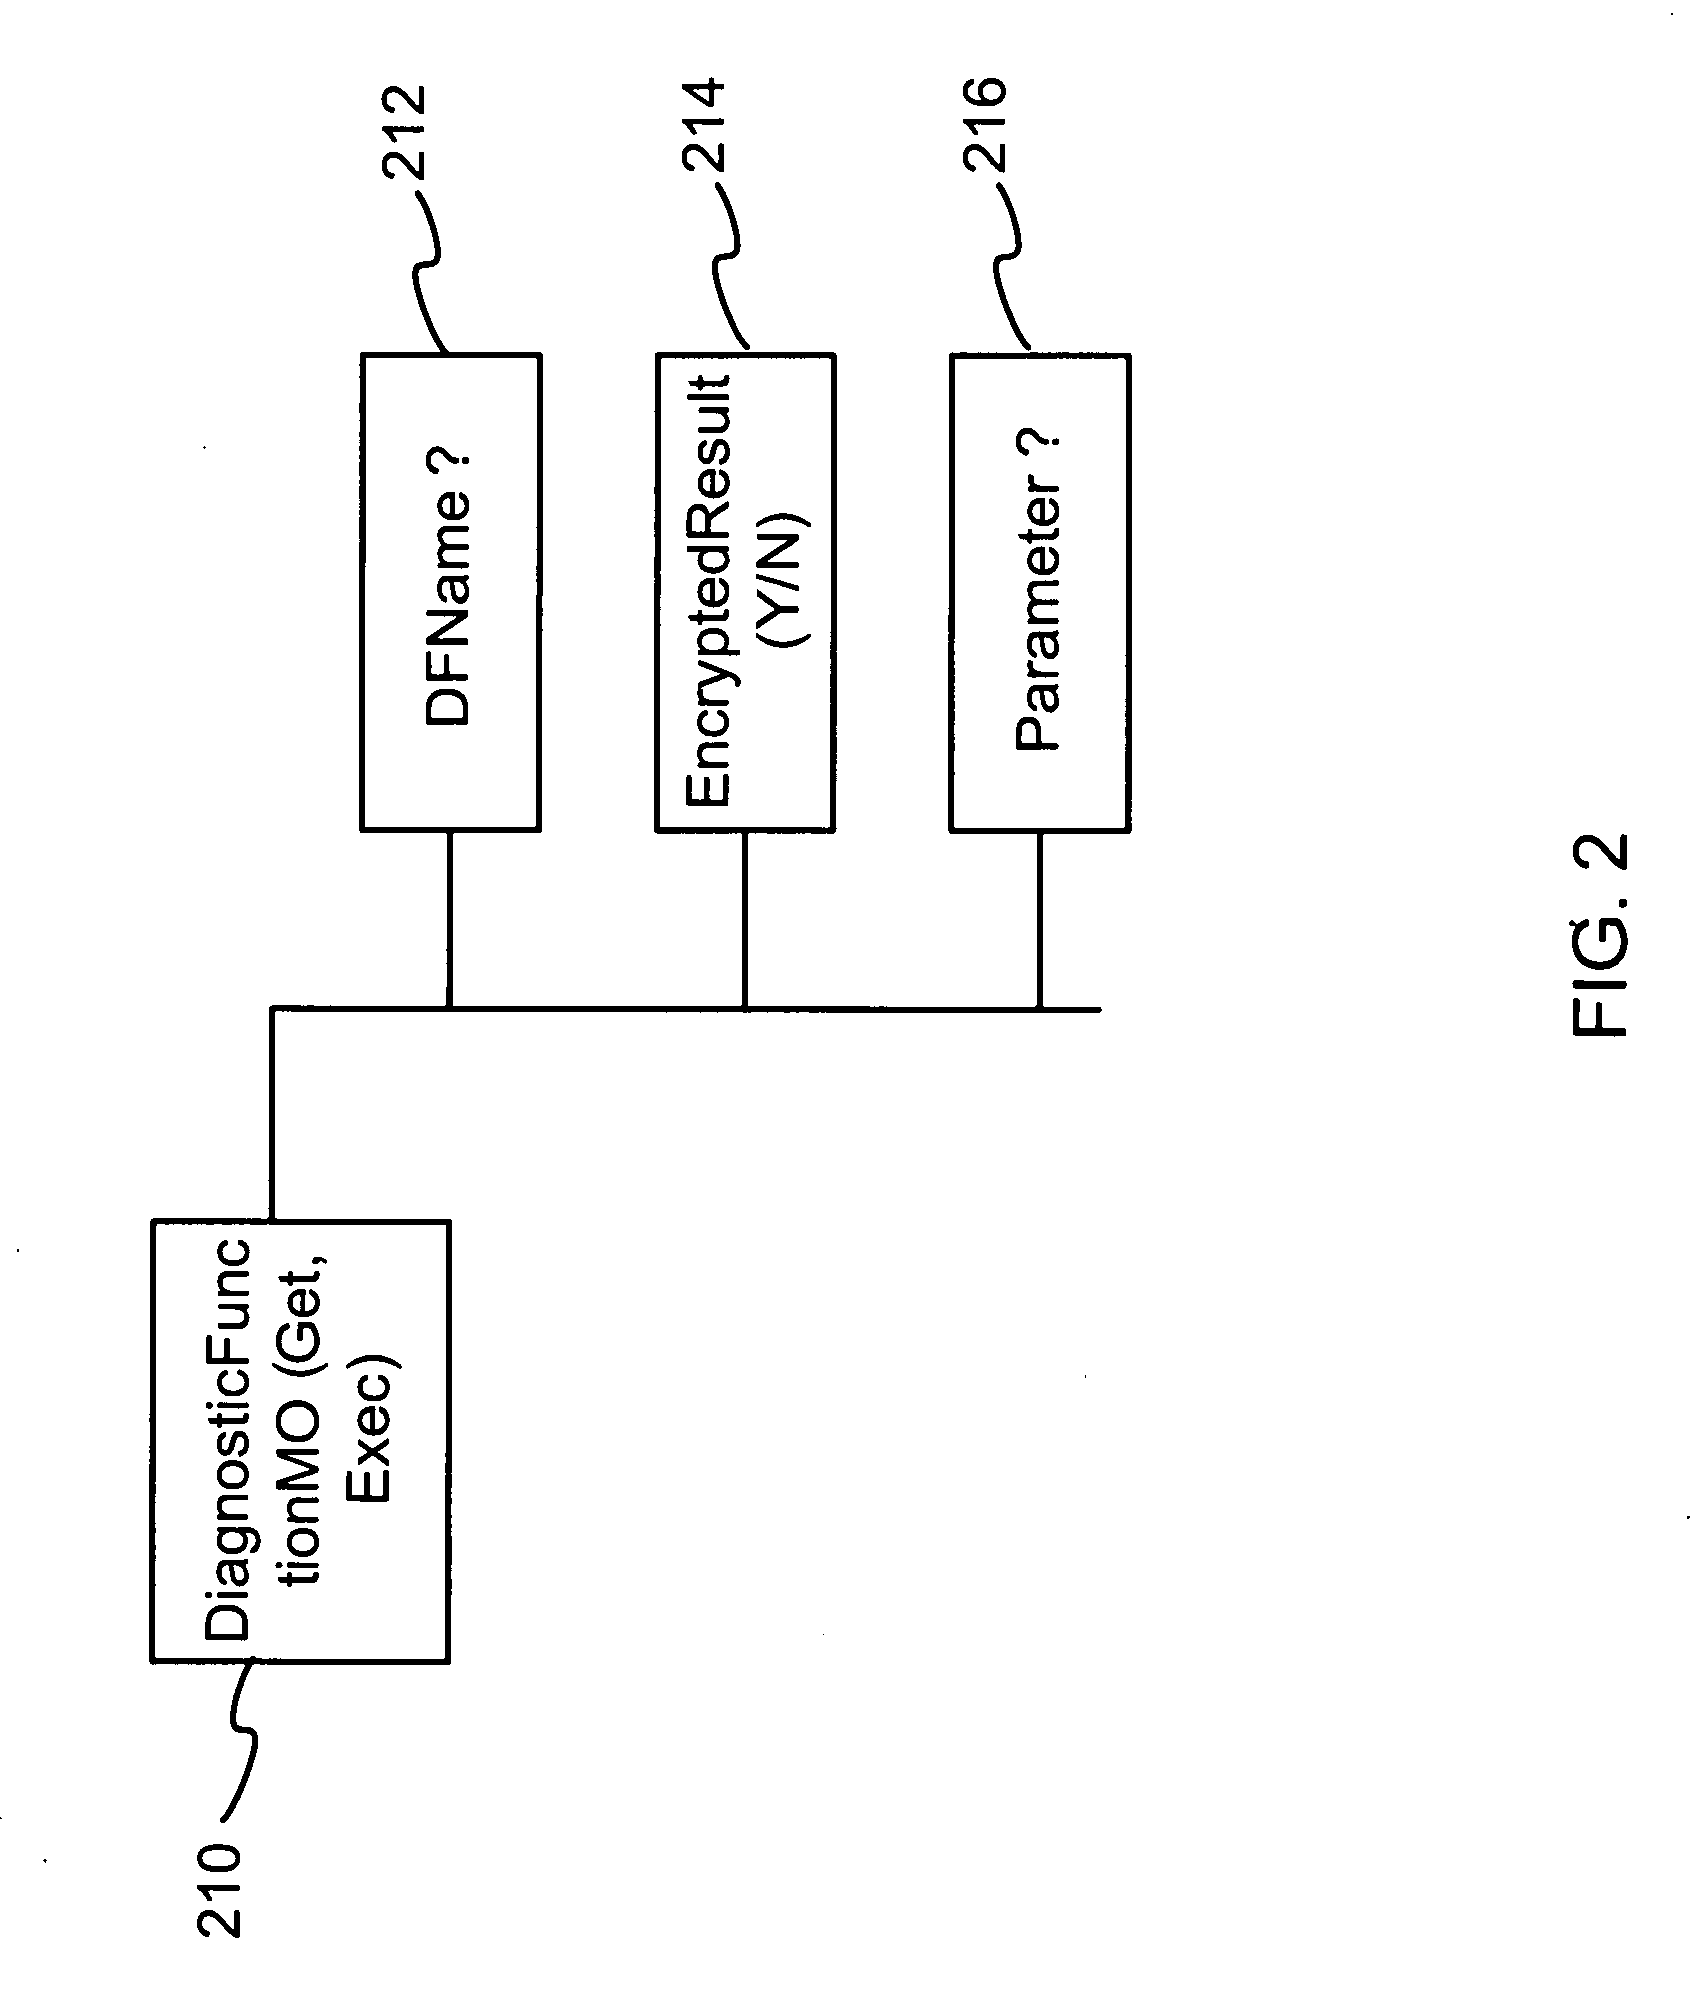 Device and network capable of mobile diagnostics based on diagnostic management objects